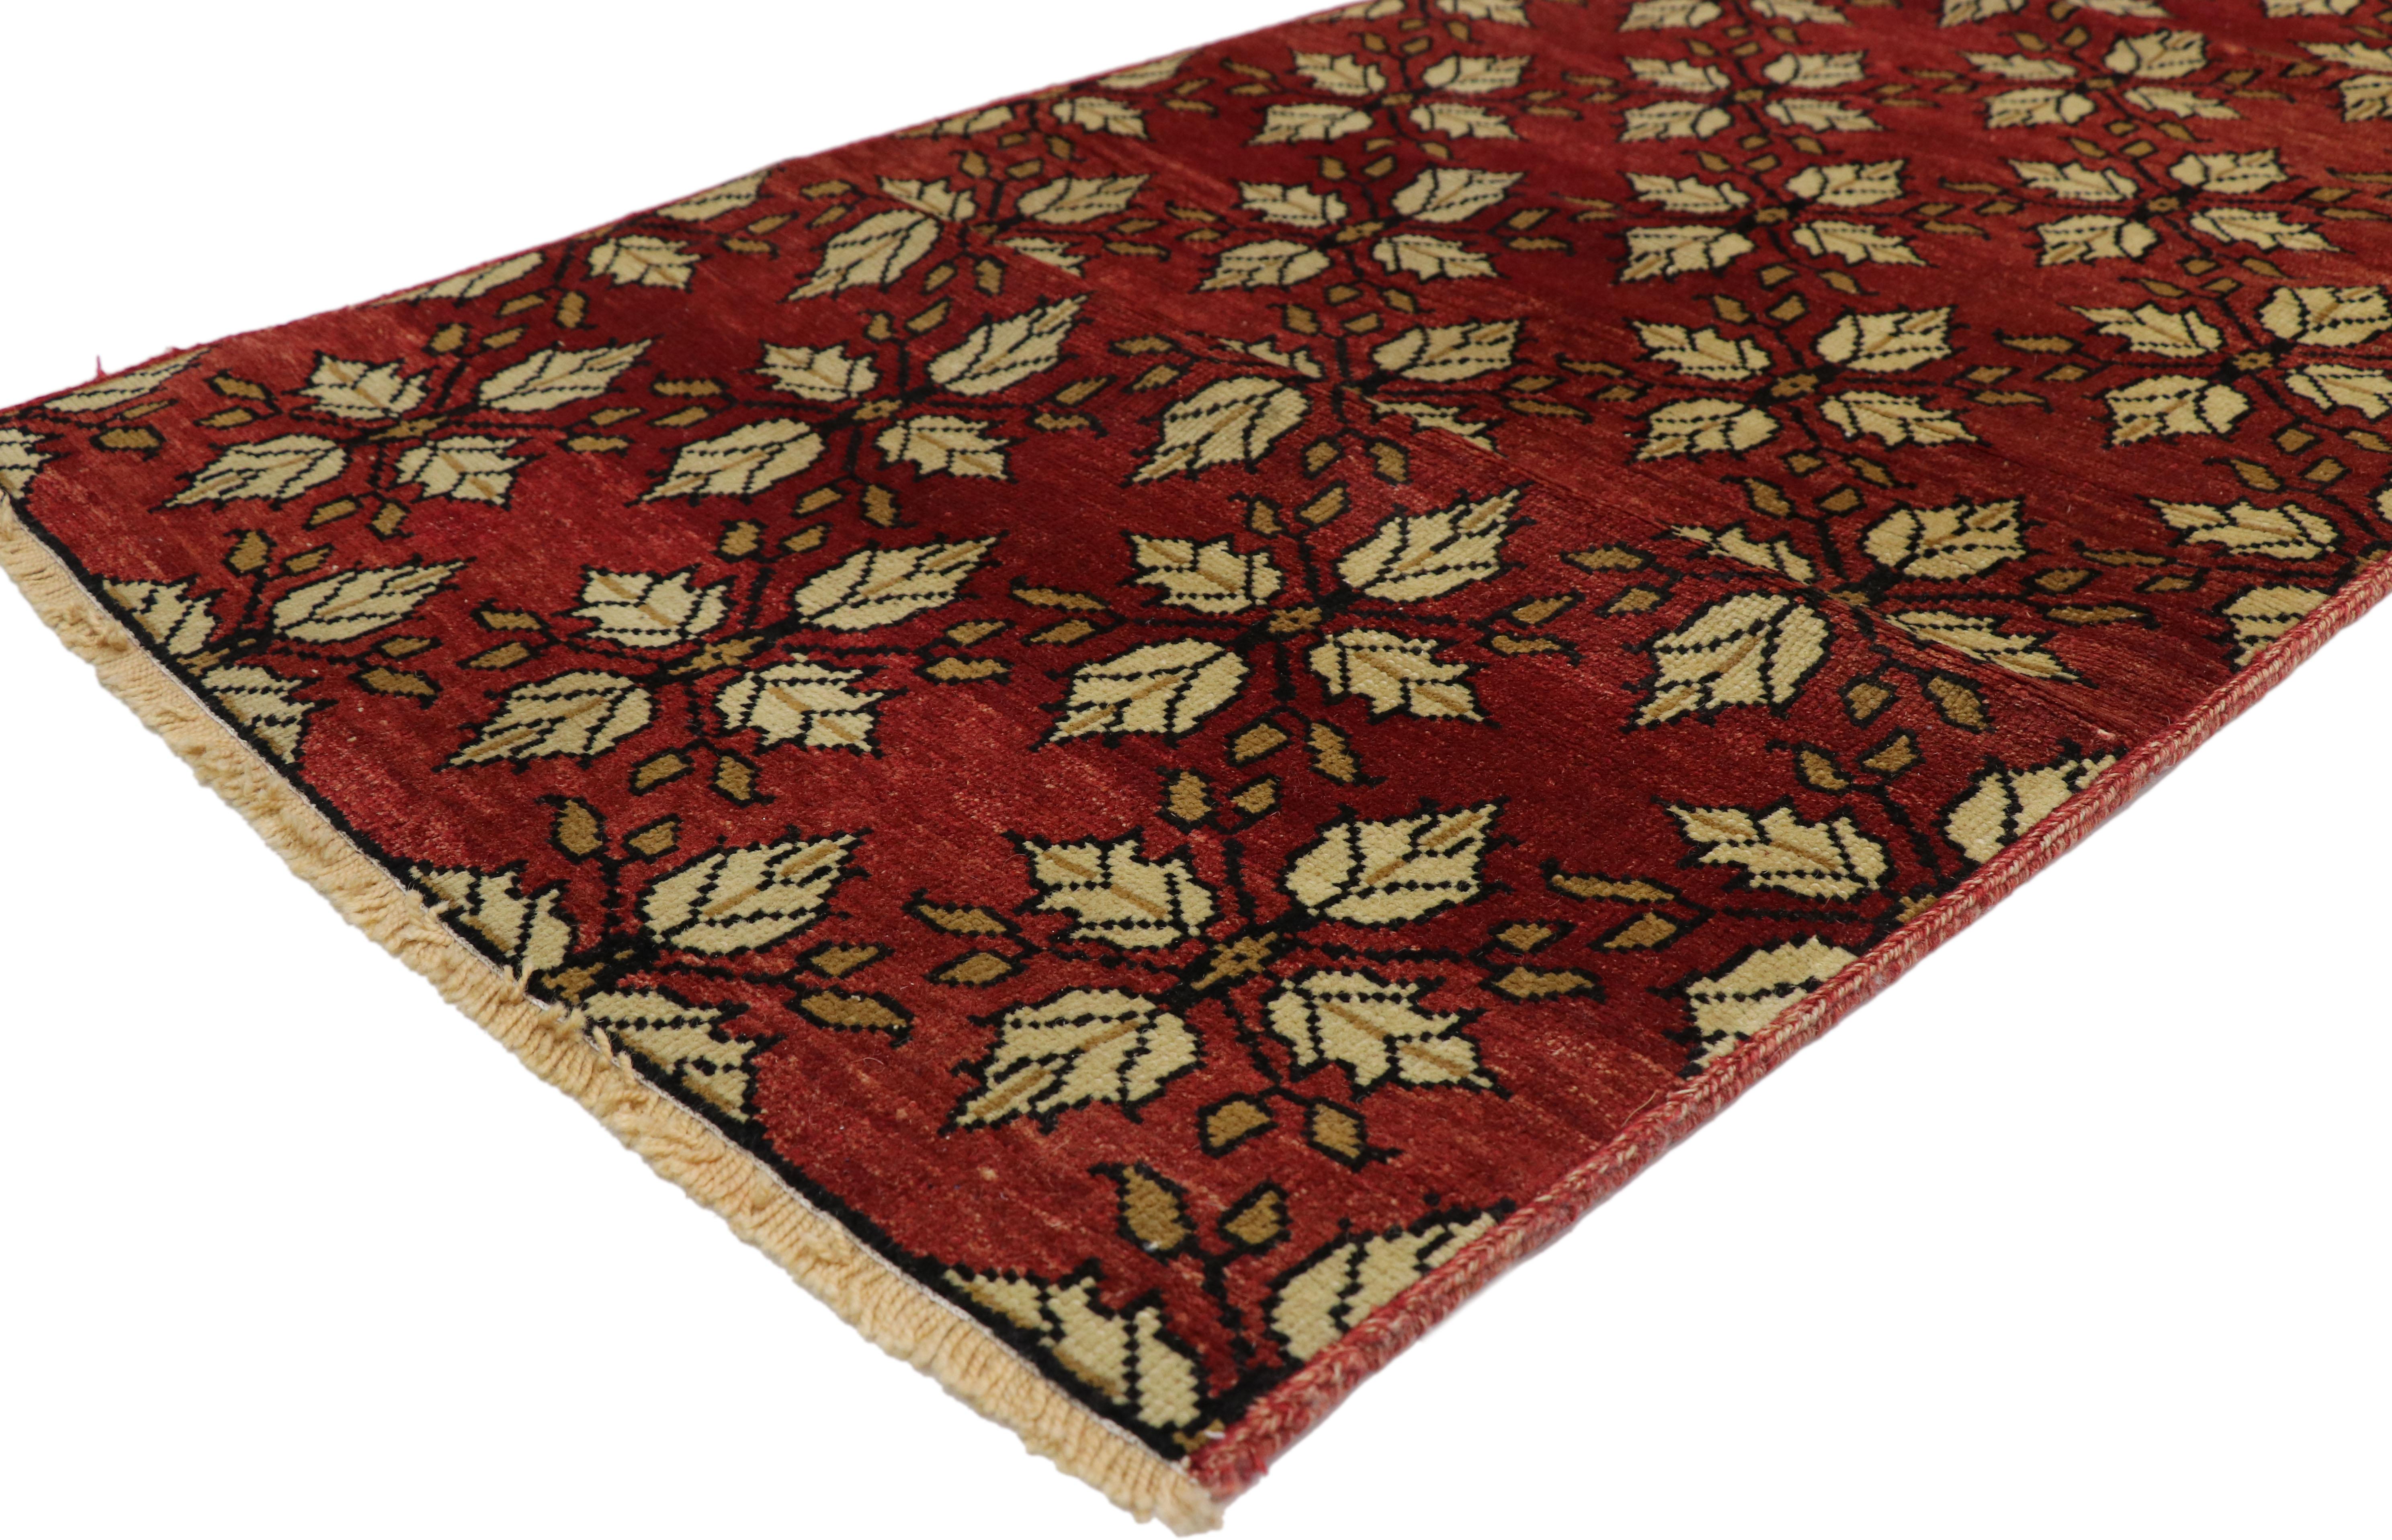 50658 Vintage Turkish Oushak Runner, 02'08 x 21'08.
With its timeless style, incredible detail and texutre, this hand knotted wool vintage Turkish Oushak runner is a captivating vision of woven beauty. The eye-catching leafy details and earthy